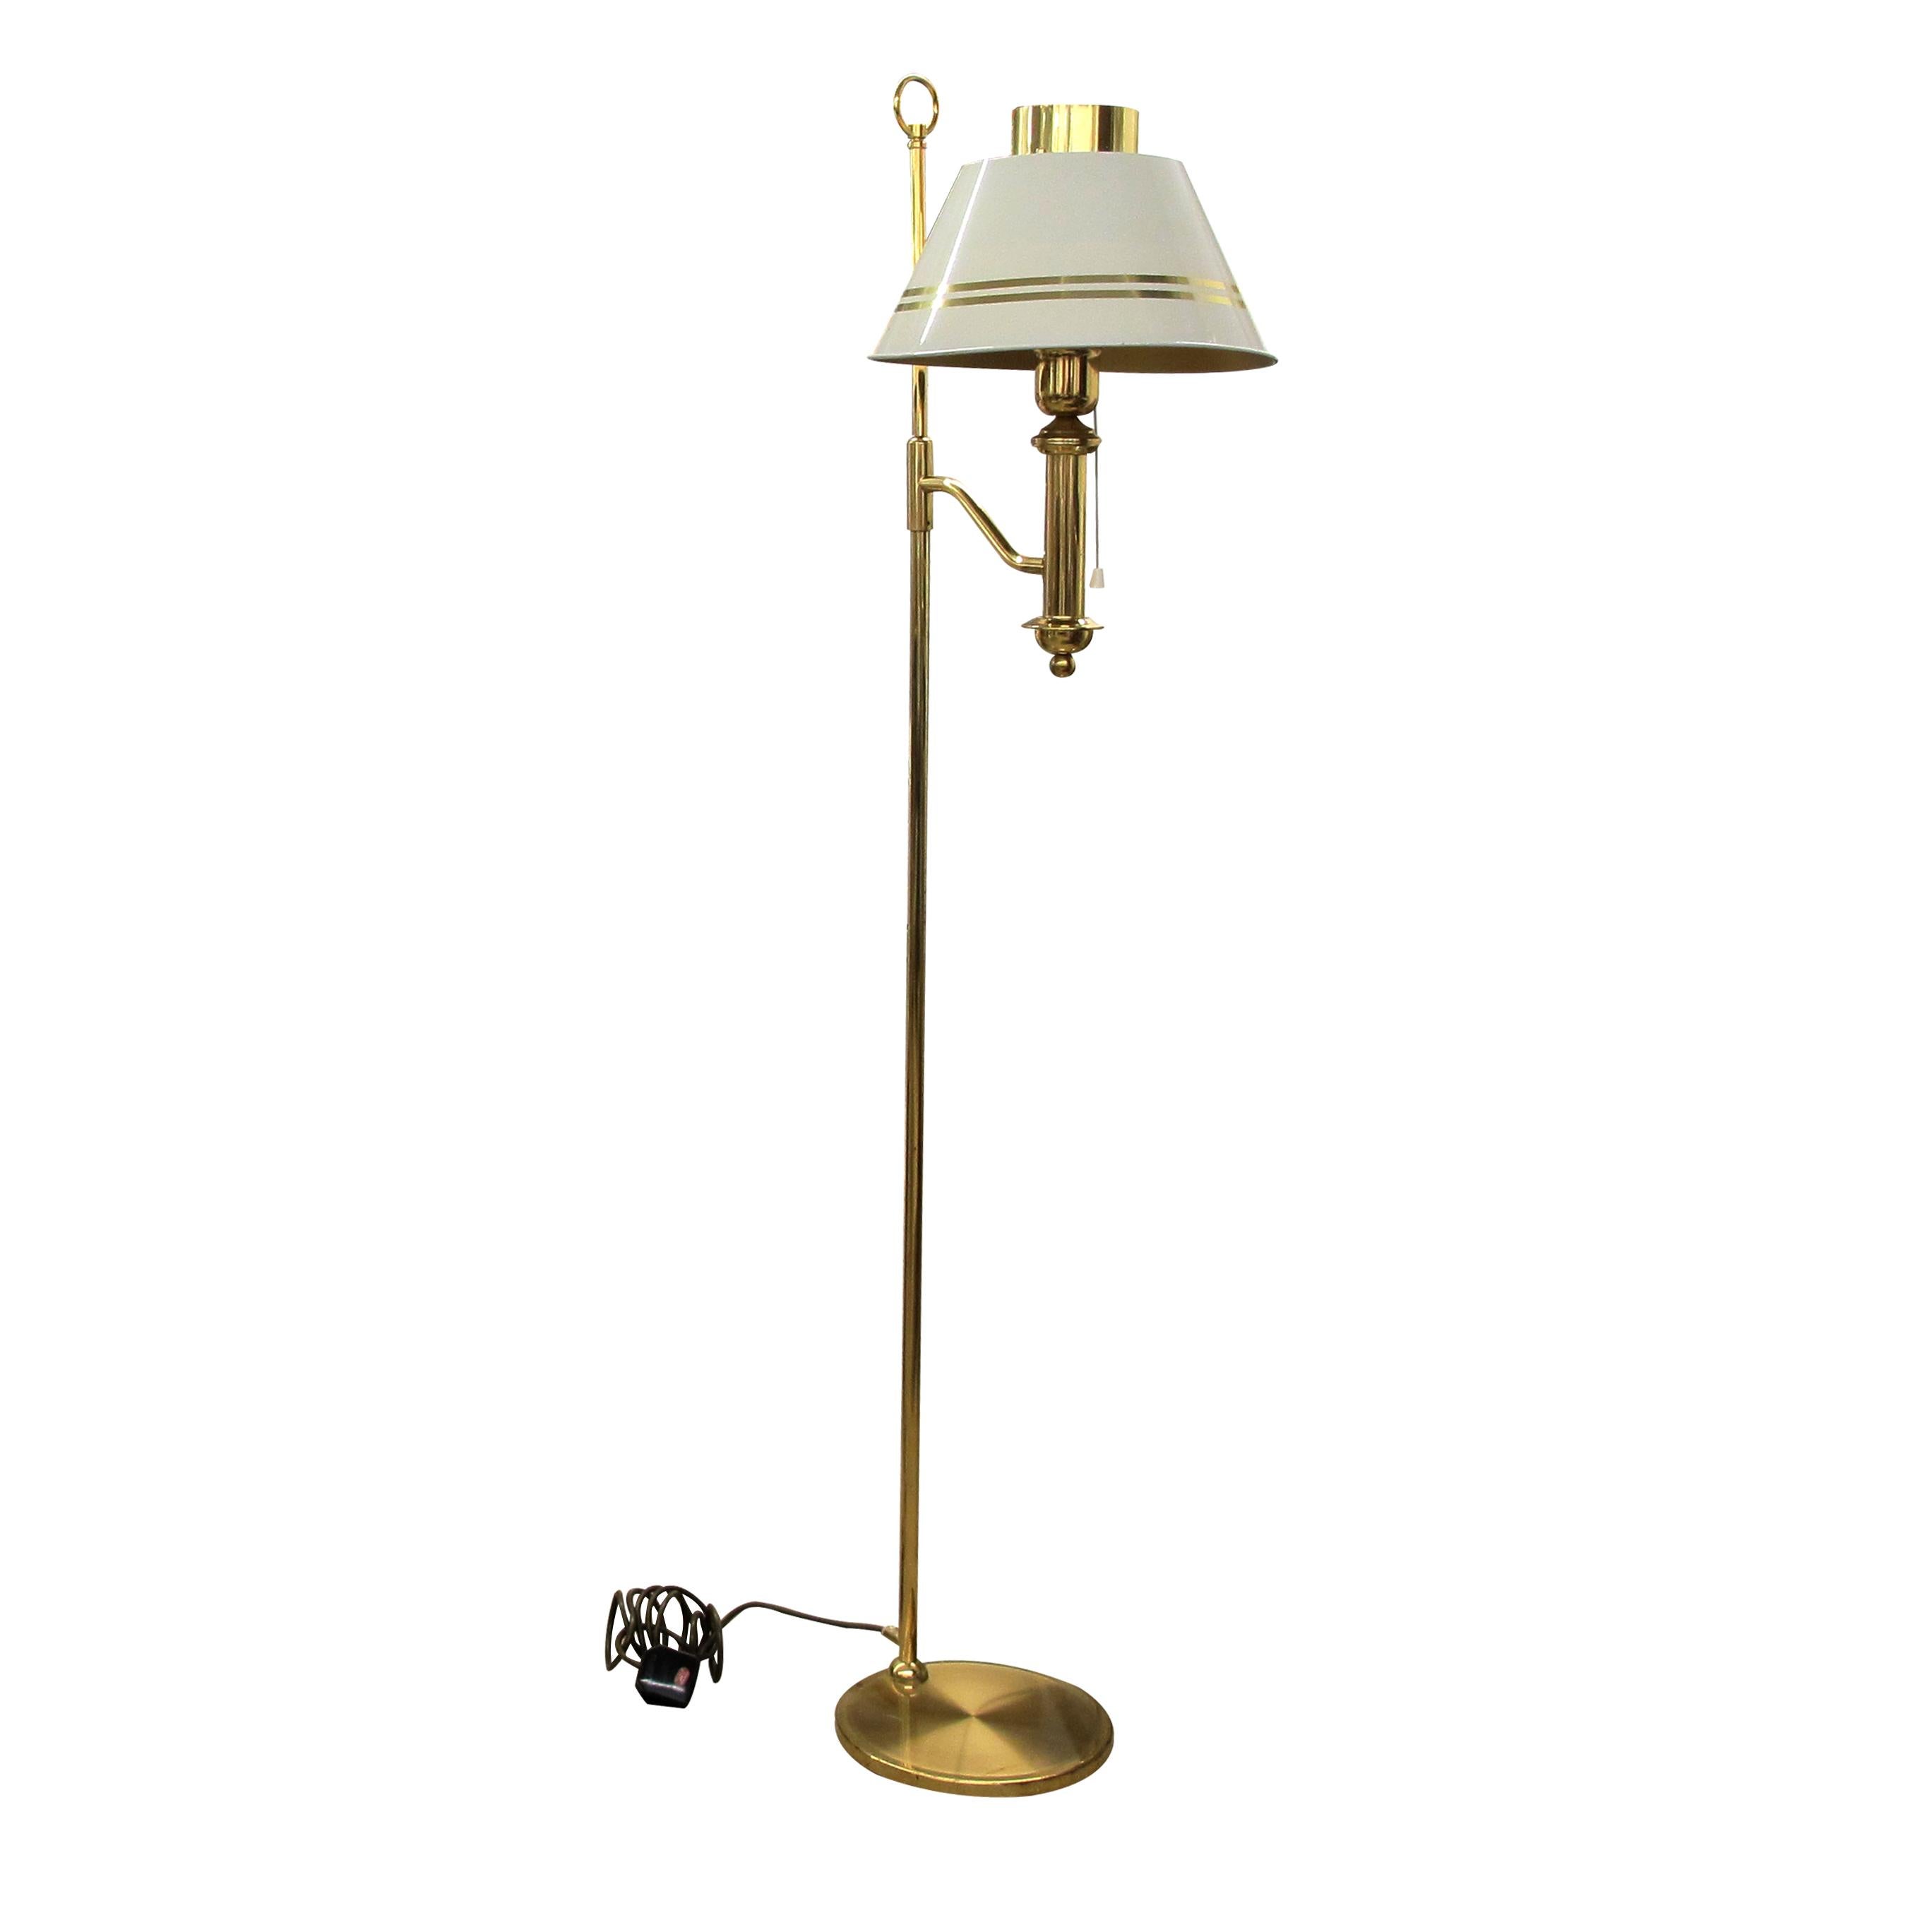 1970s Pair of Brass and Metal Bracket Floor Lamps White Shades, Swedish  In Good Condition For Sale In London, GB